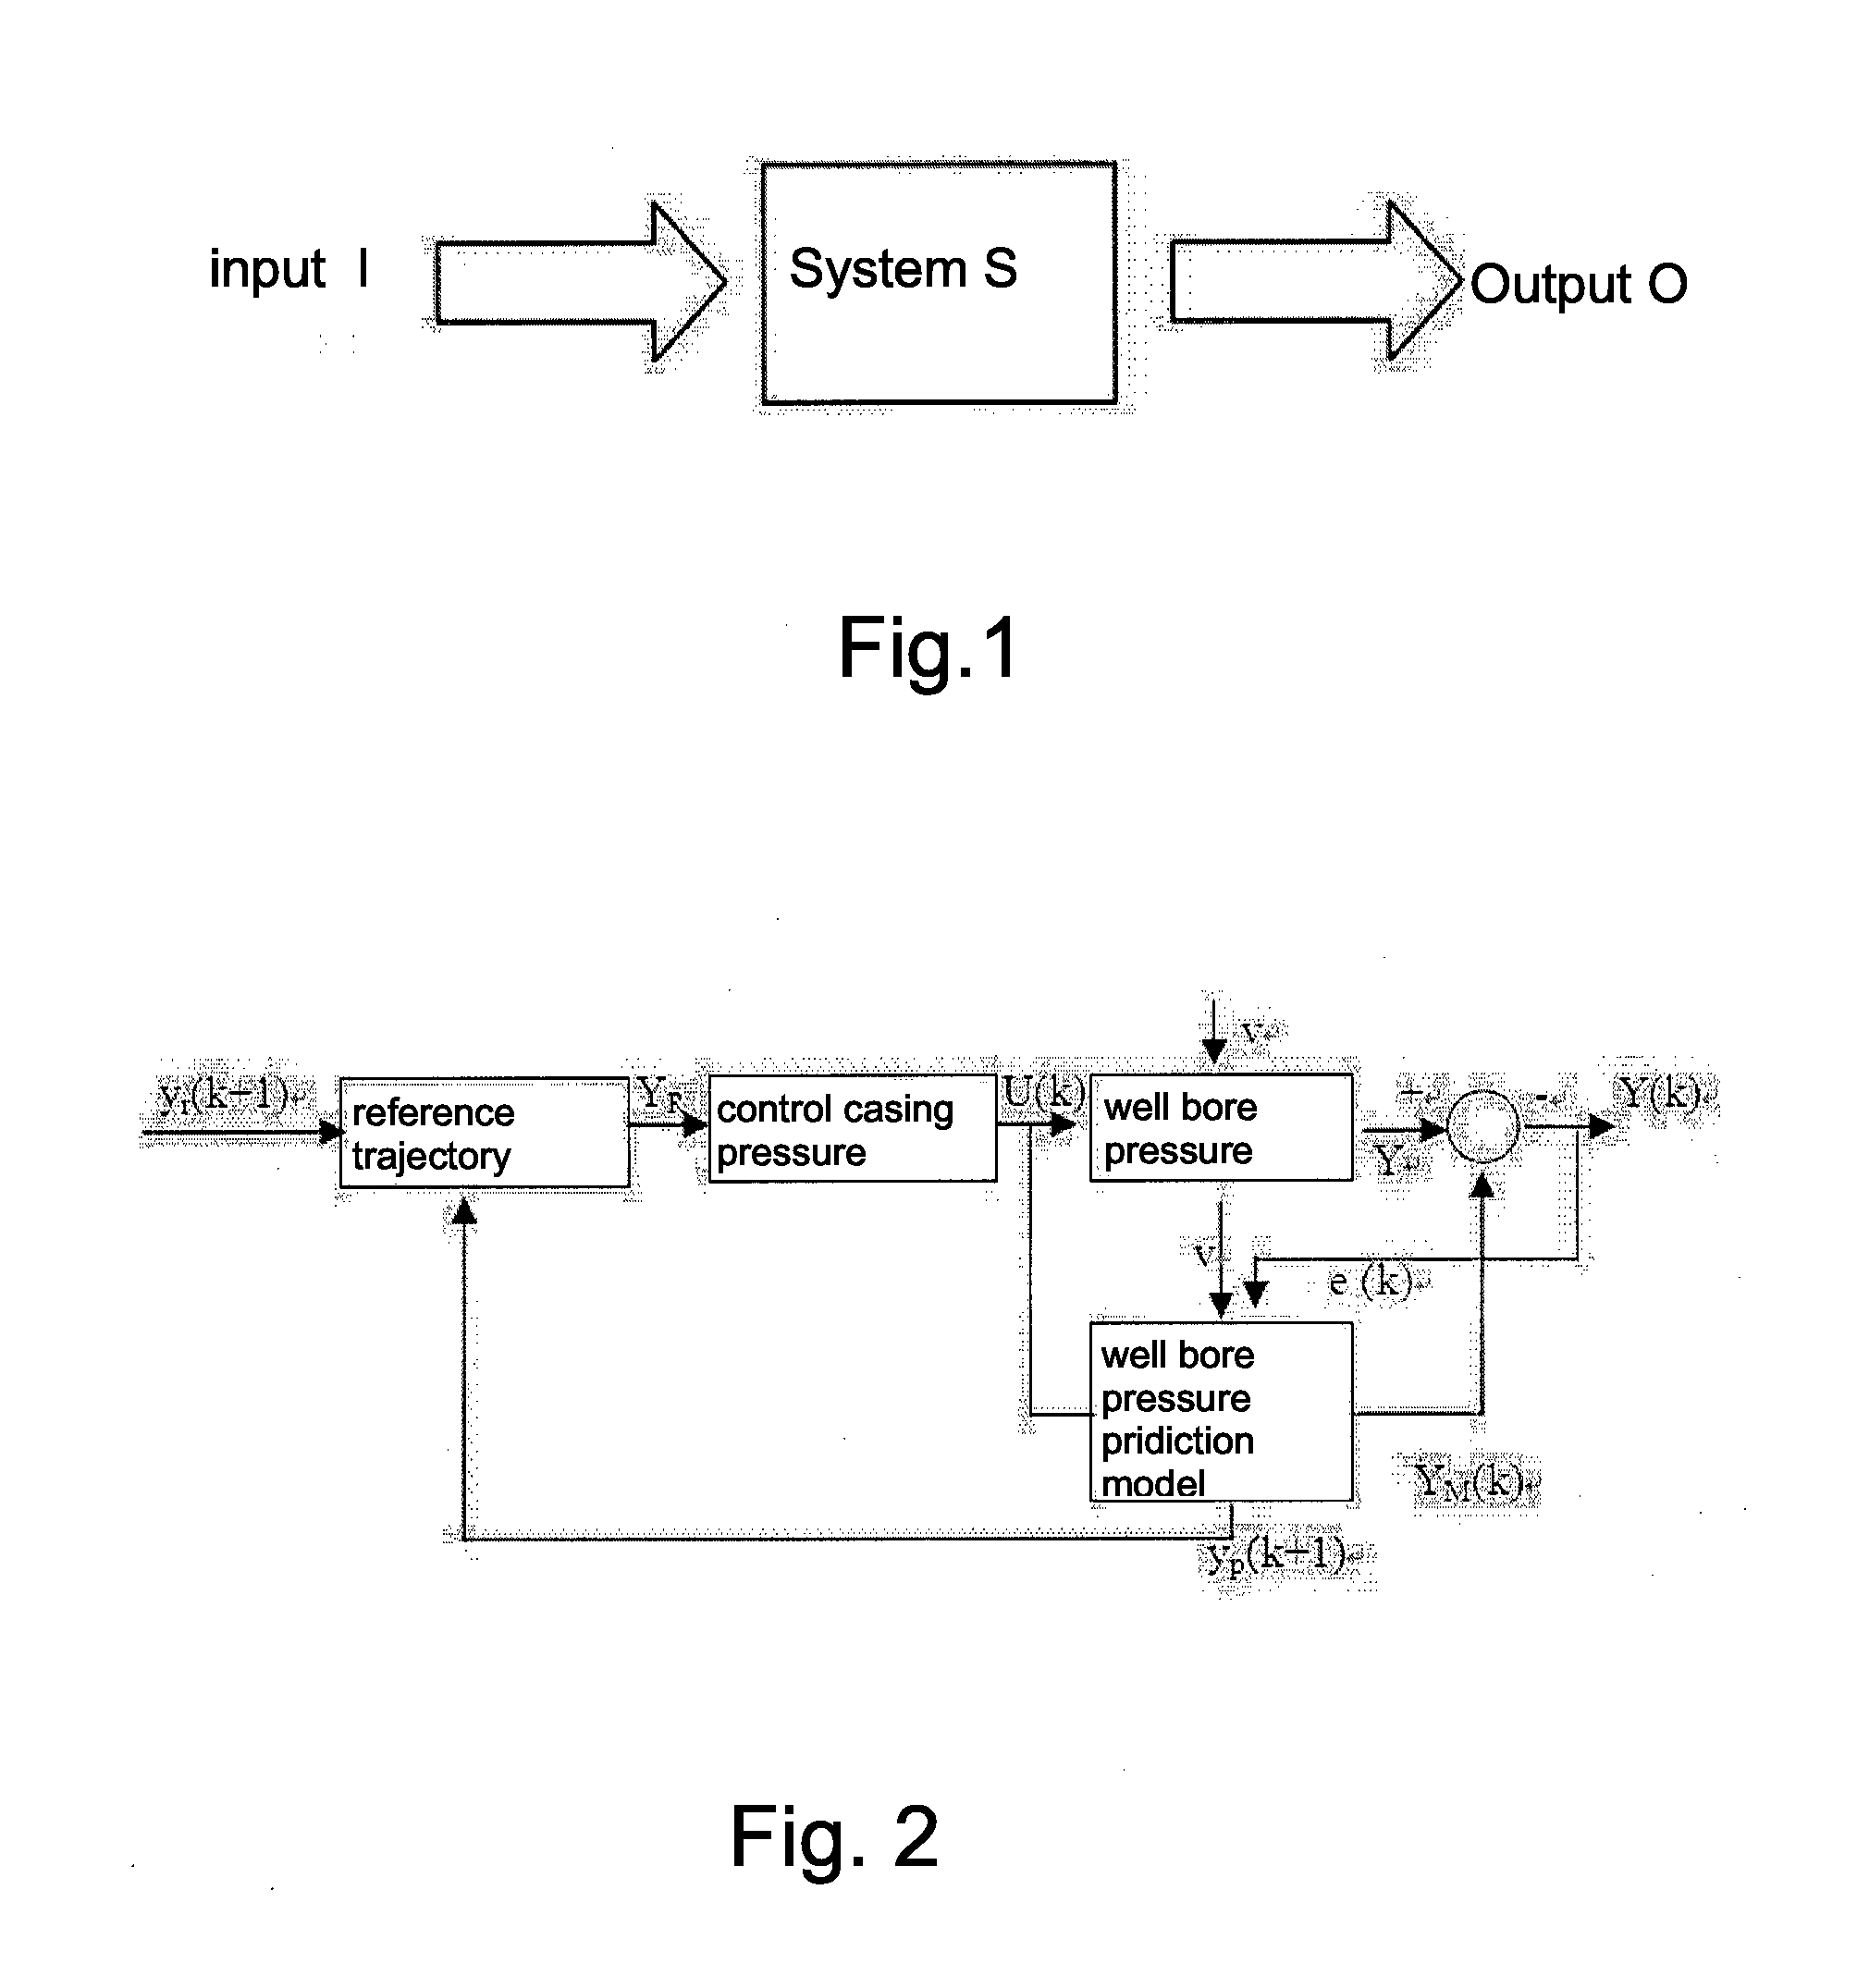 Method for controlling well bore pressure based on model prediction control theory and systems theory